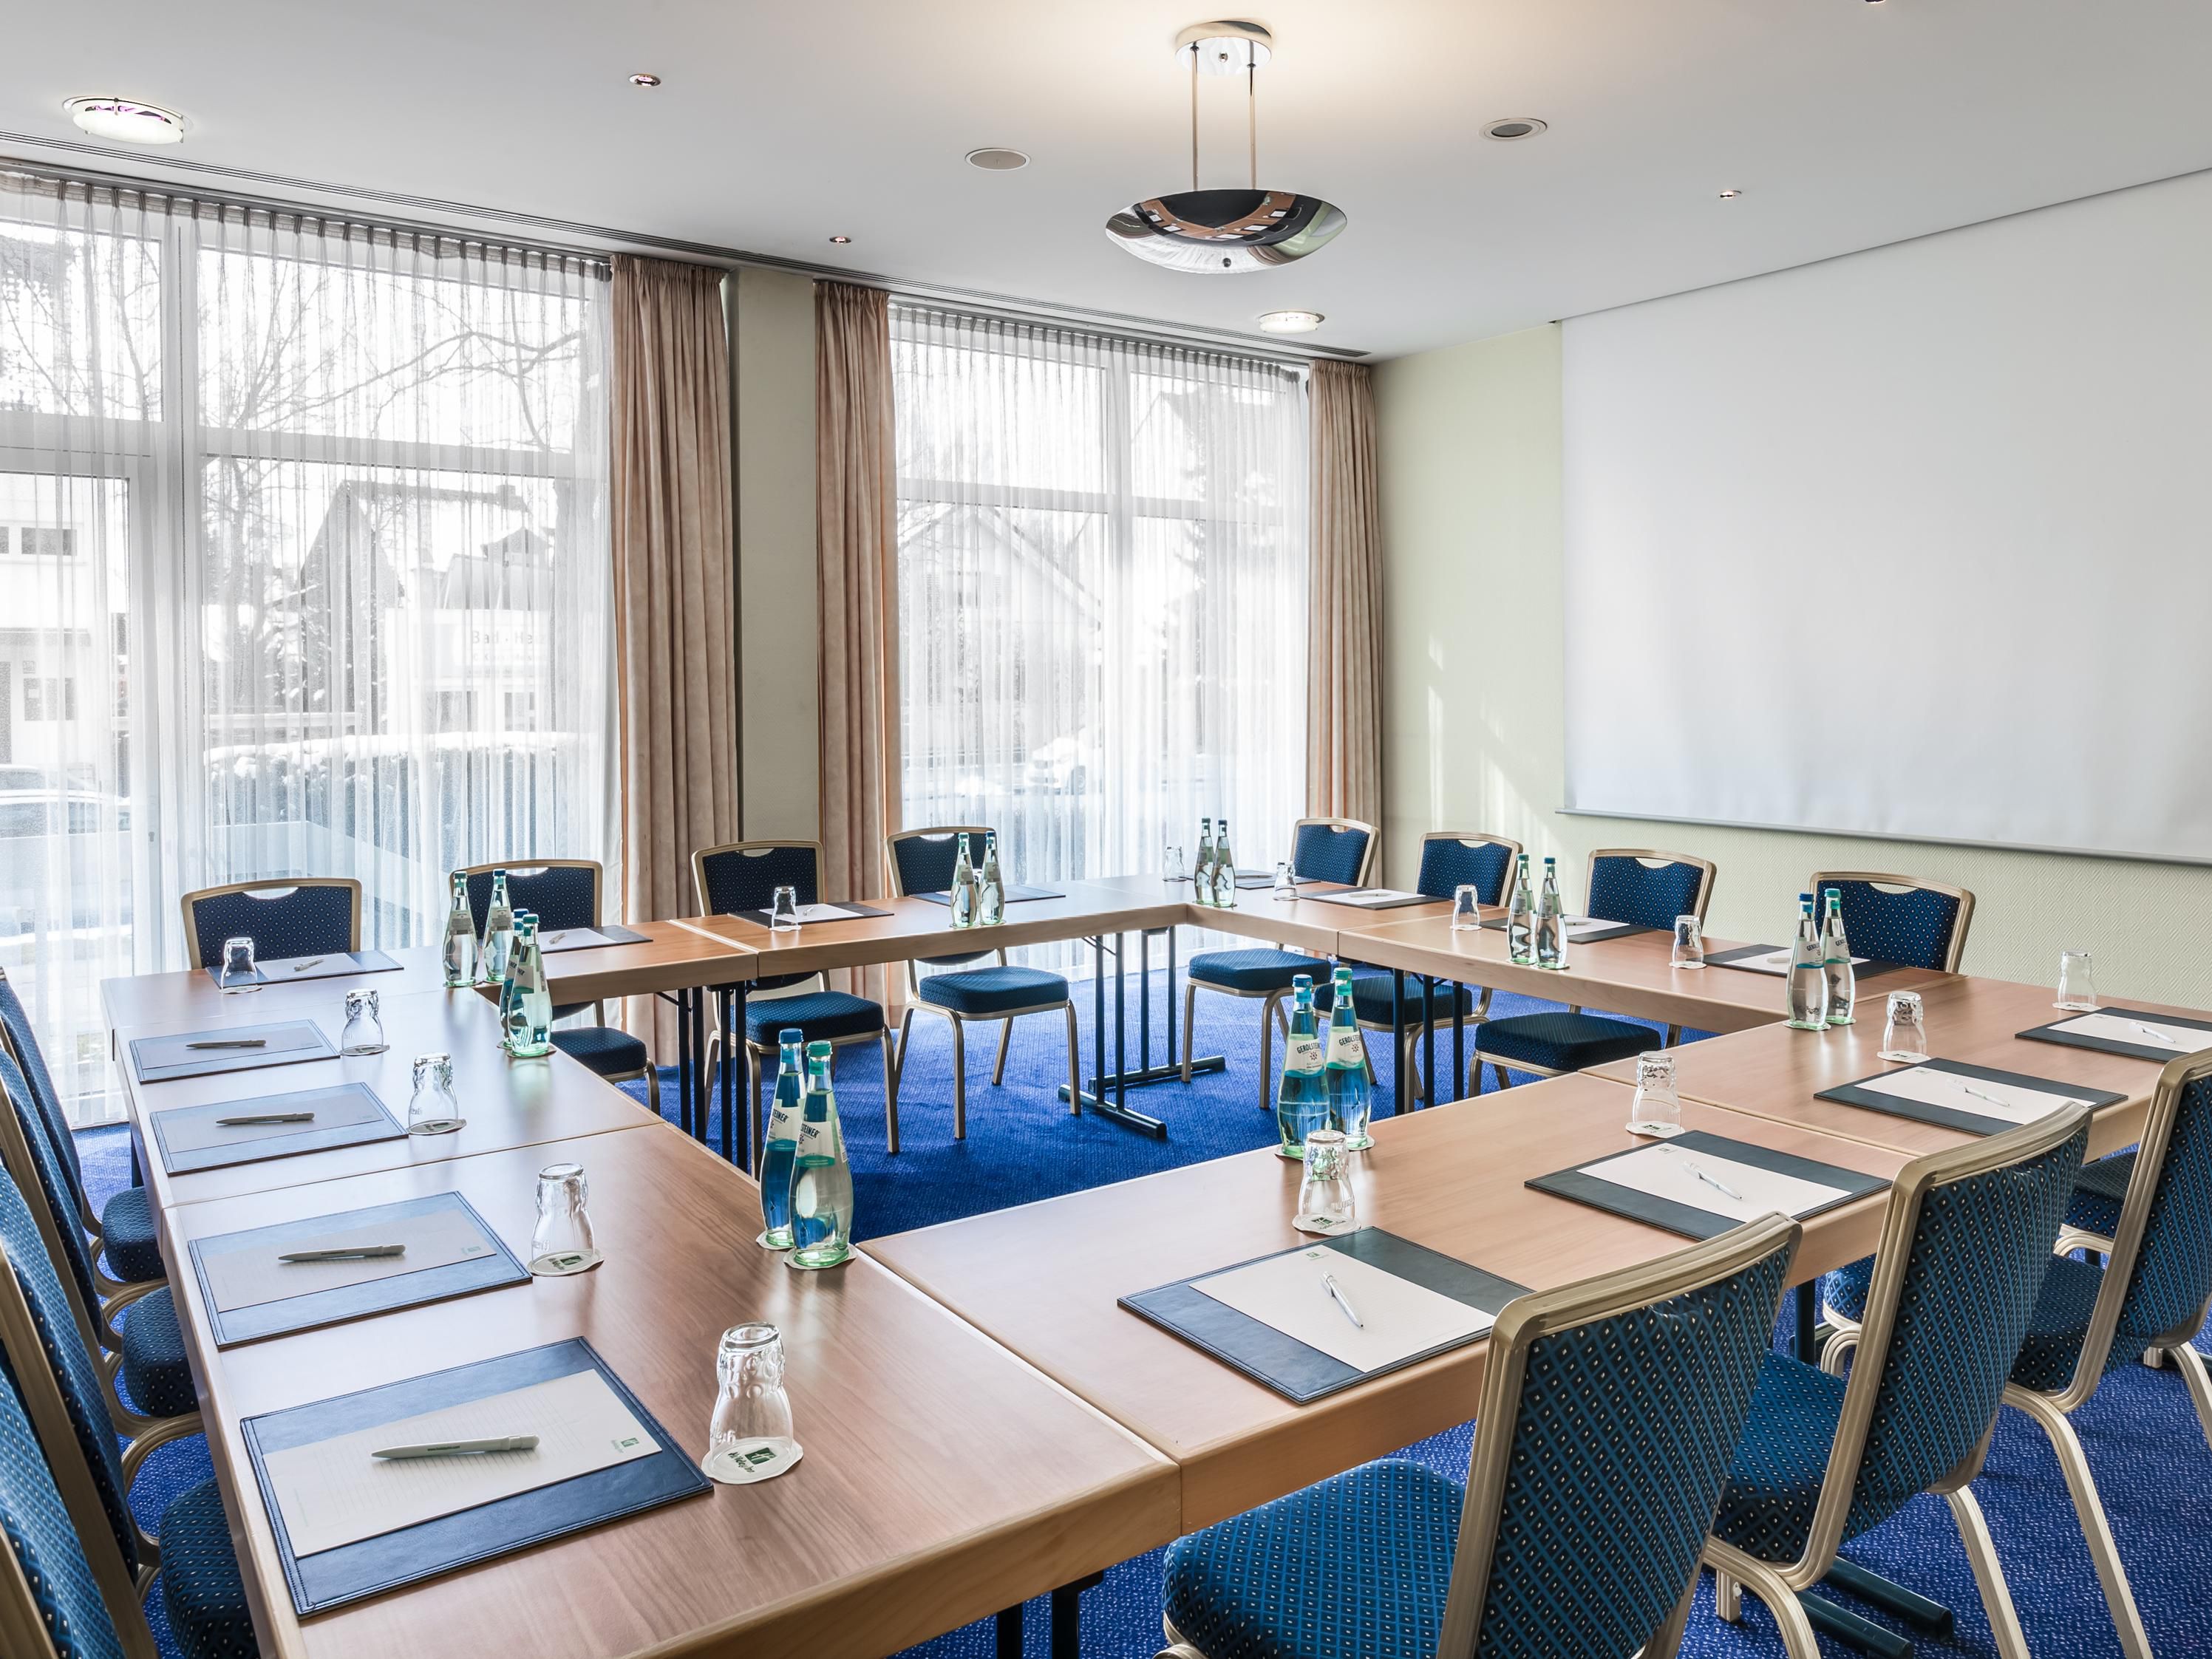 Unlock the ideal venue for your gatherings at our HI Munich South boasting 11 versatile meeting rooms. Accommodating up to 320 guests, our spaces are tailored for events of all sizes. From intimate meetings to grand gatherings, find the perfect setting for your next memorable occasion.